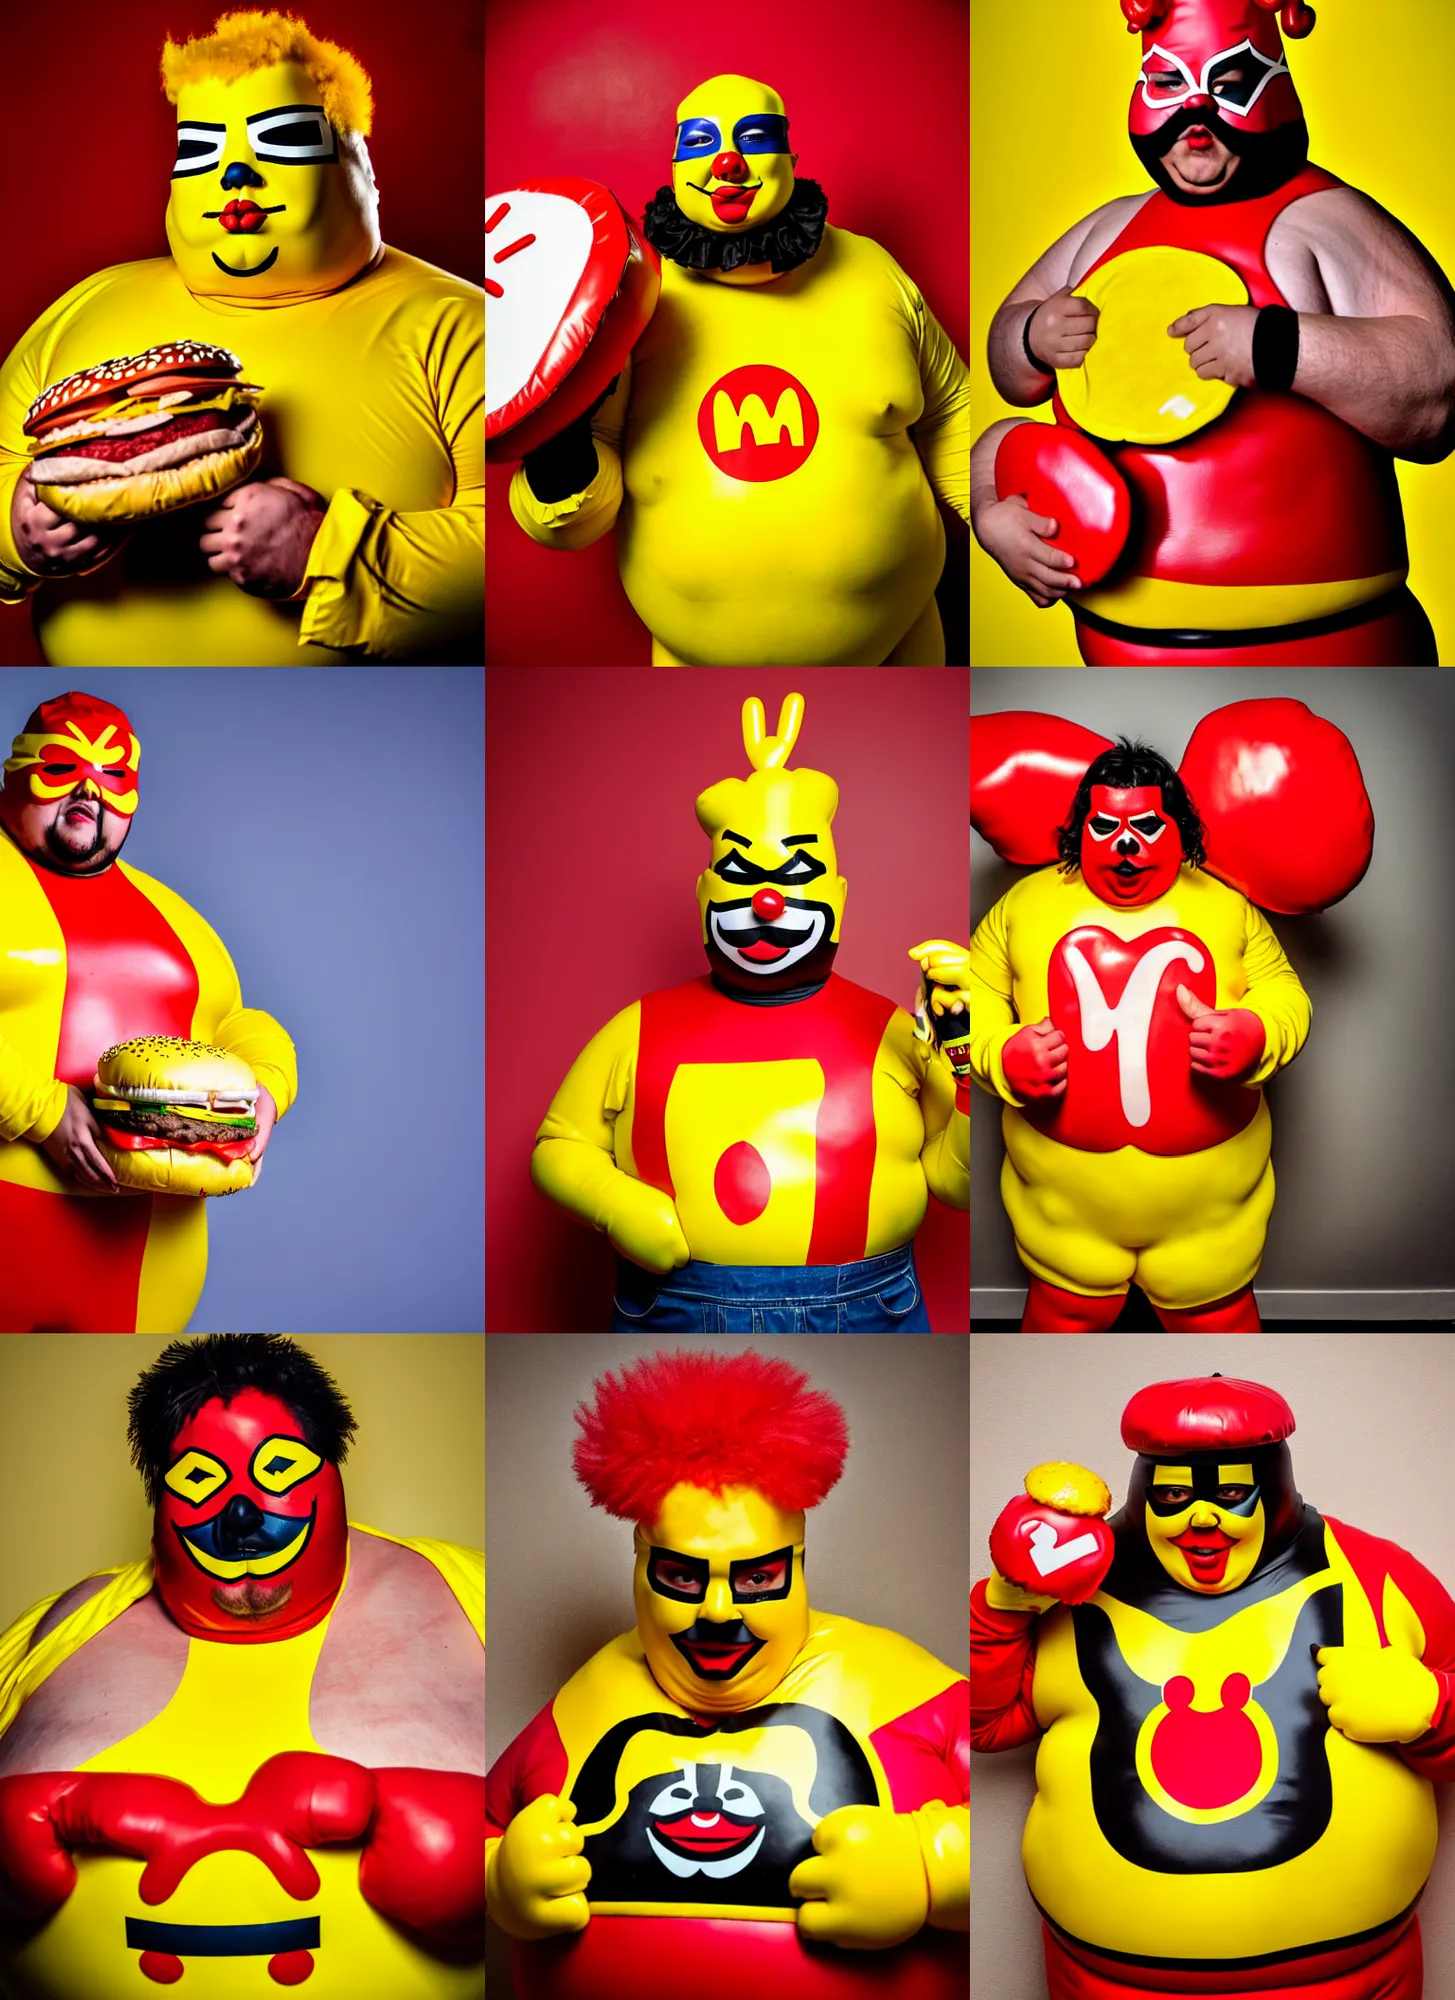 Prompt: wide angle lens portrait of a very chubby looking lucha libre dressed in yellow and red rubber latex costume holding a huge hamburger, red Ronald McDonald hairstyle, a Macdonalds logo on his chest, D&D, photography inspired by Oleg Vdovenko